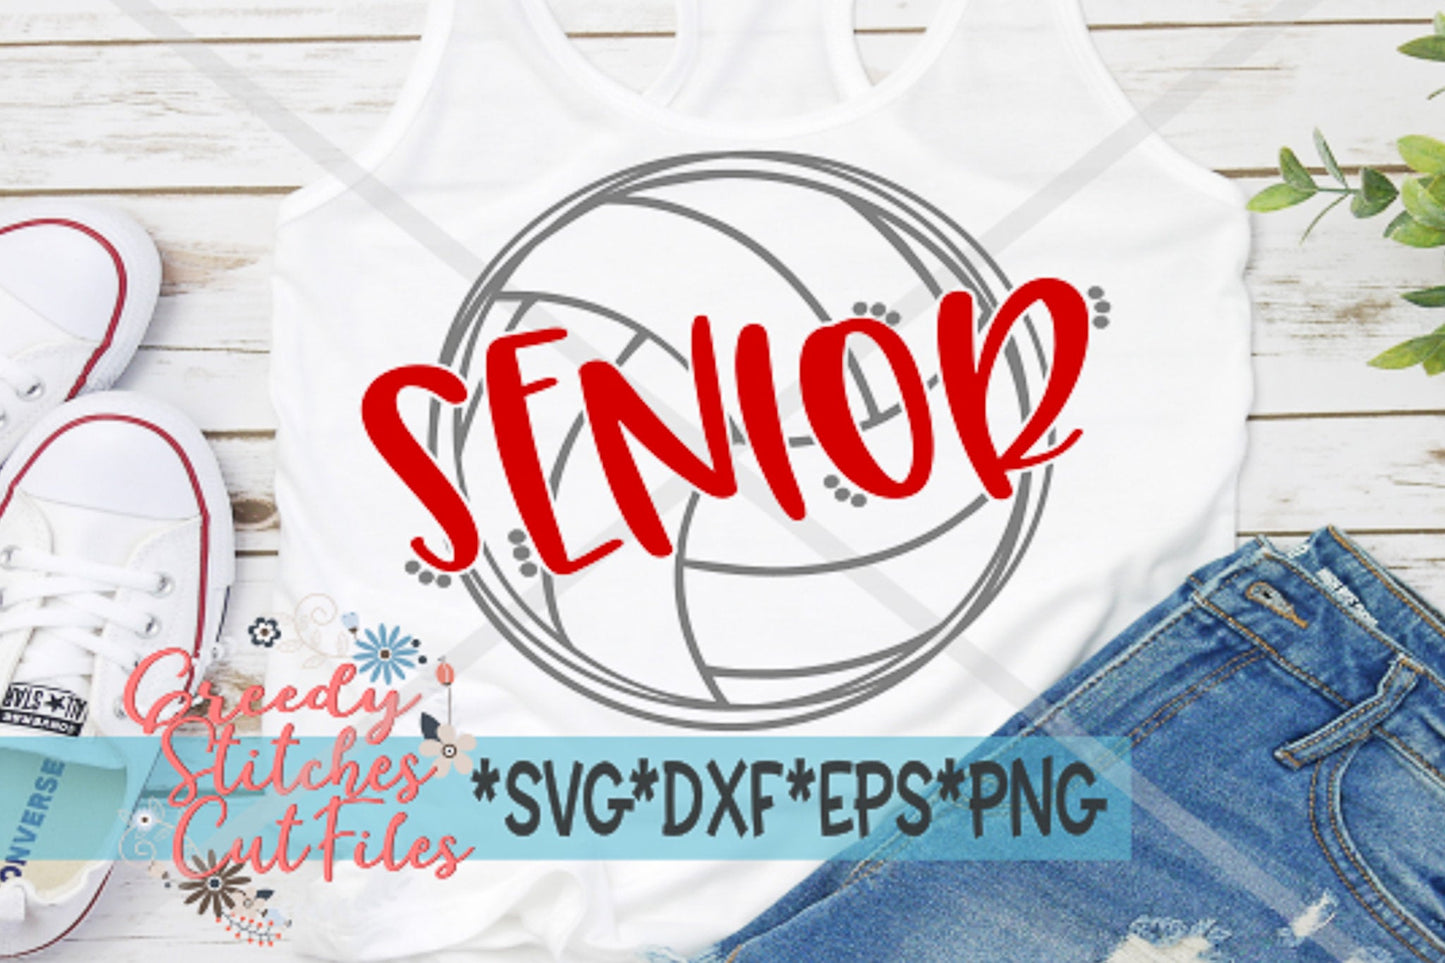 Senior Volleyball svg, dxf, eps, png |  Softball SvG | Volleyball DxF | Senior SvG | Senior Volleyball SvG  | Instant Download Cut File